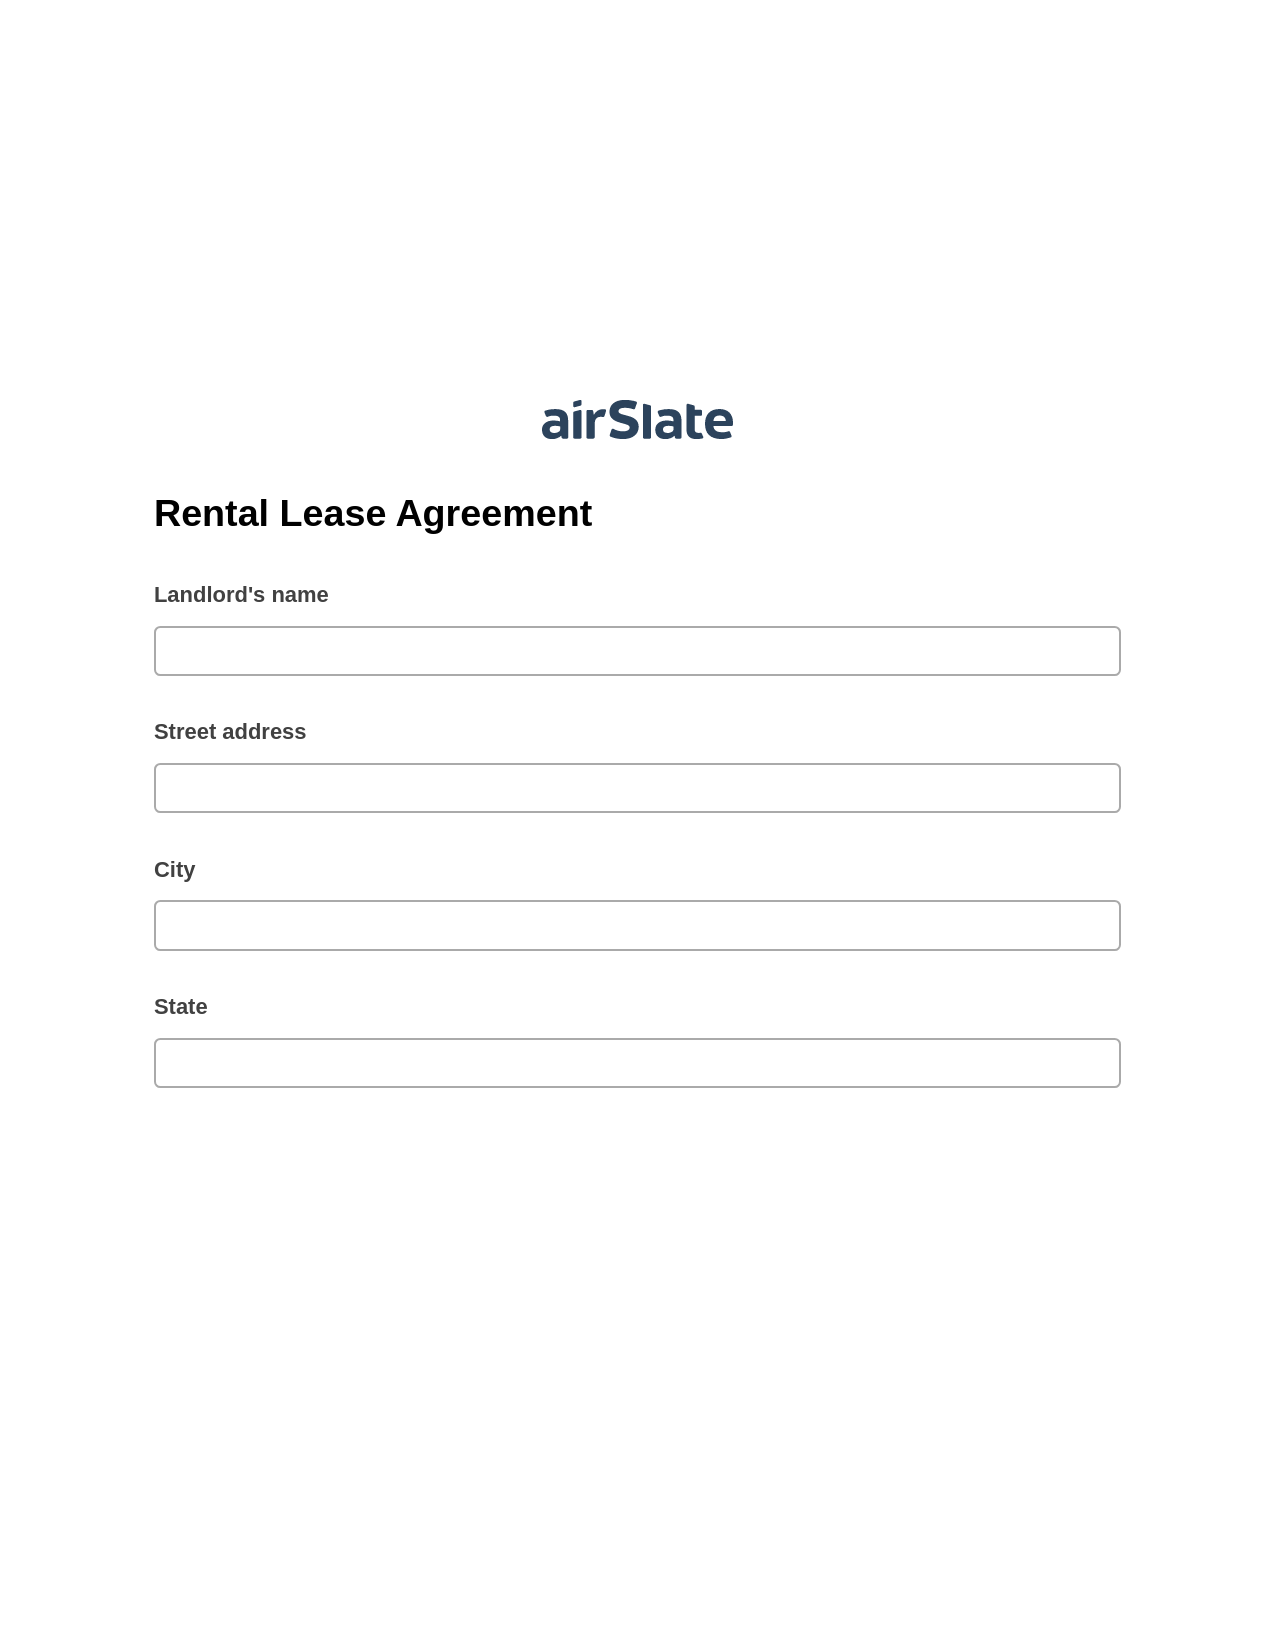 Rental Lease Agreement Pre-fill from Google Sheet Dropdown Options Bot, Google Sheet Two-Way Binding Bot, Export to NetSuite Record Bot